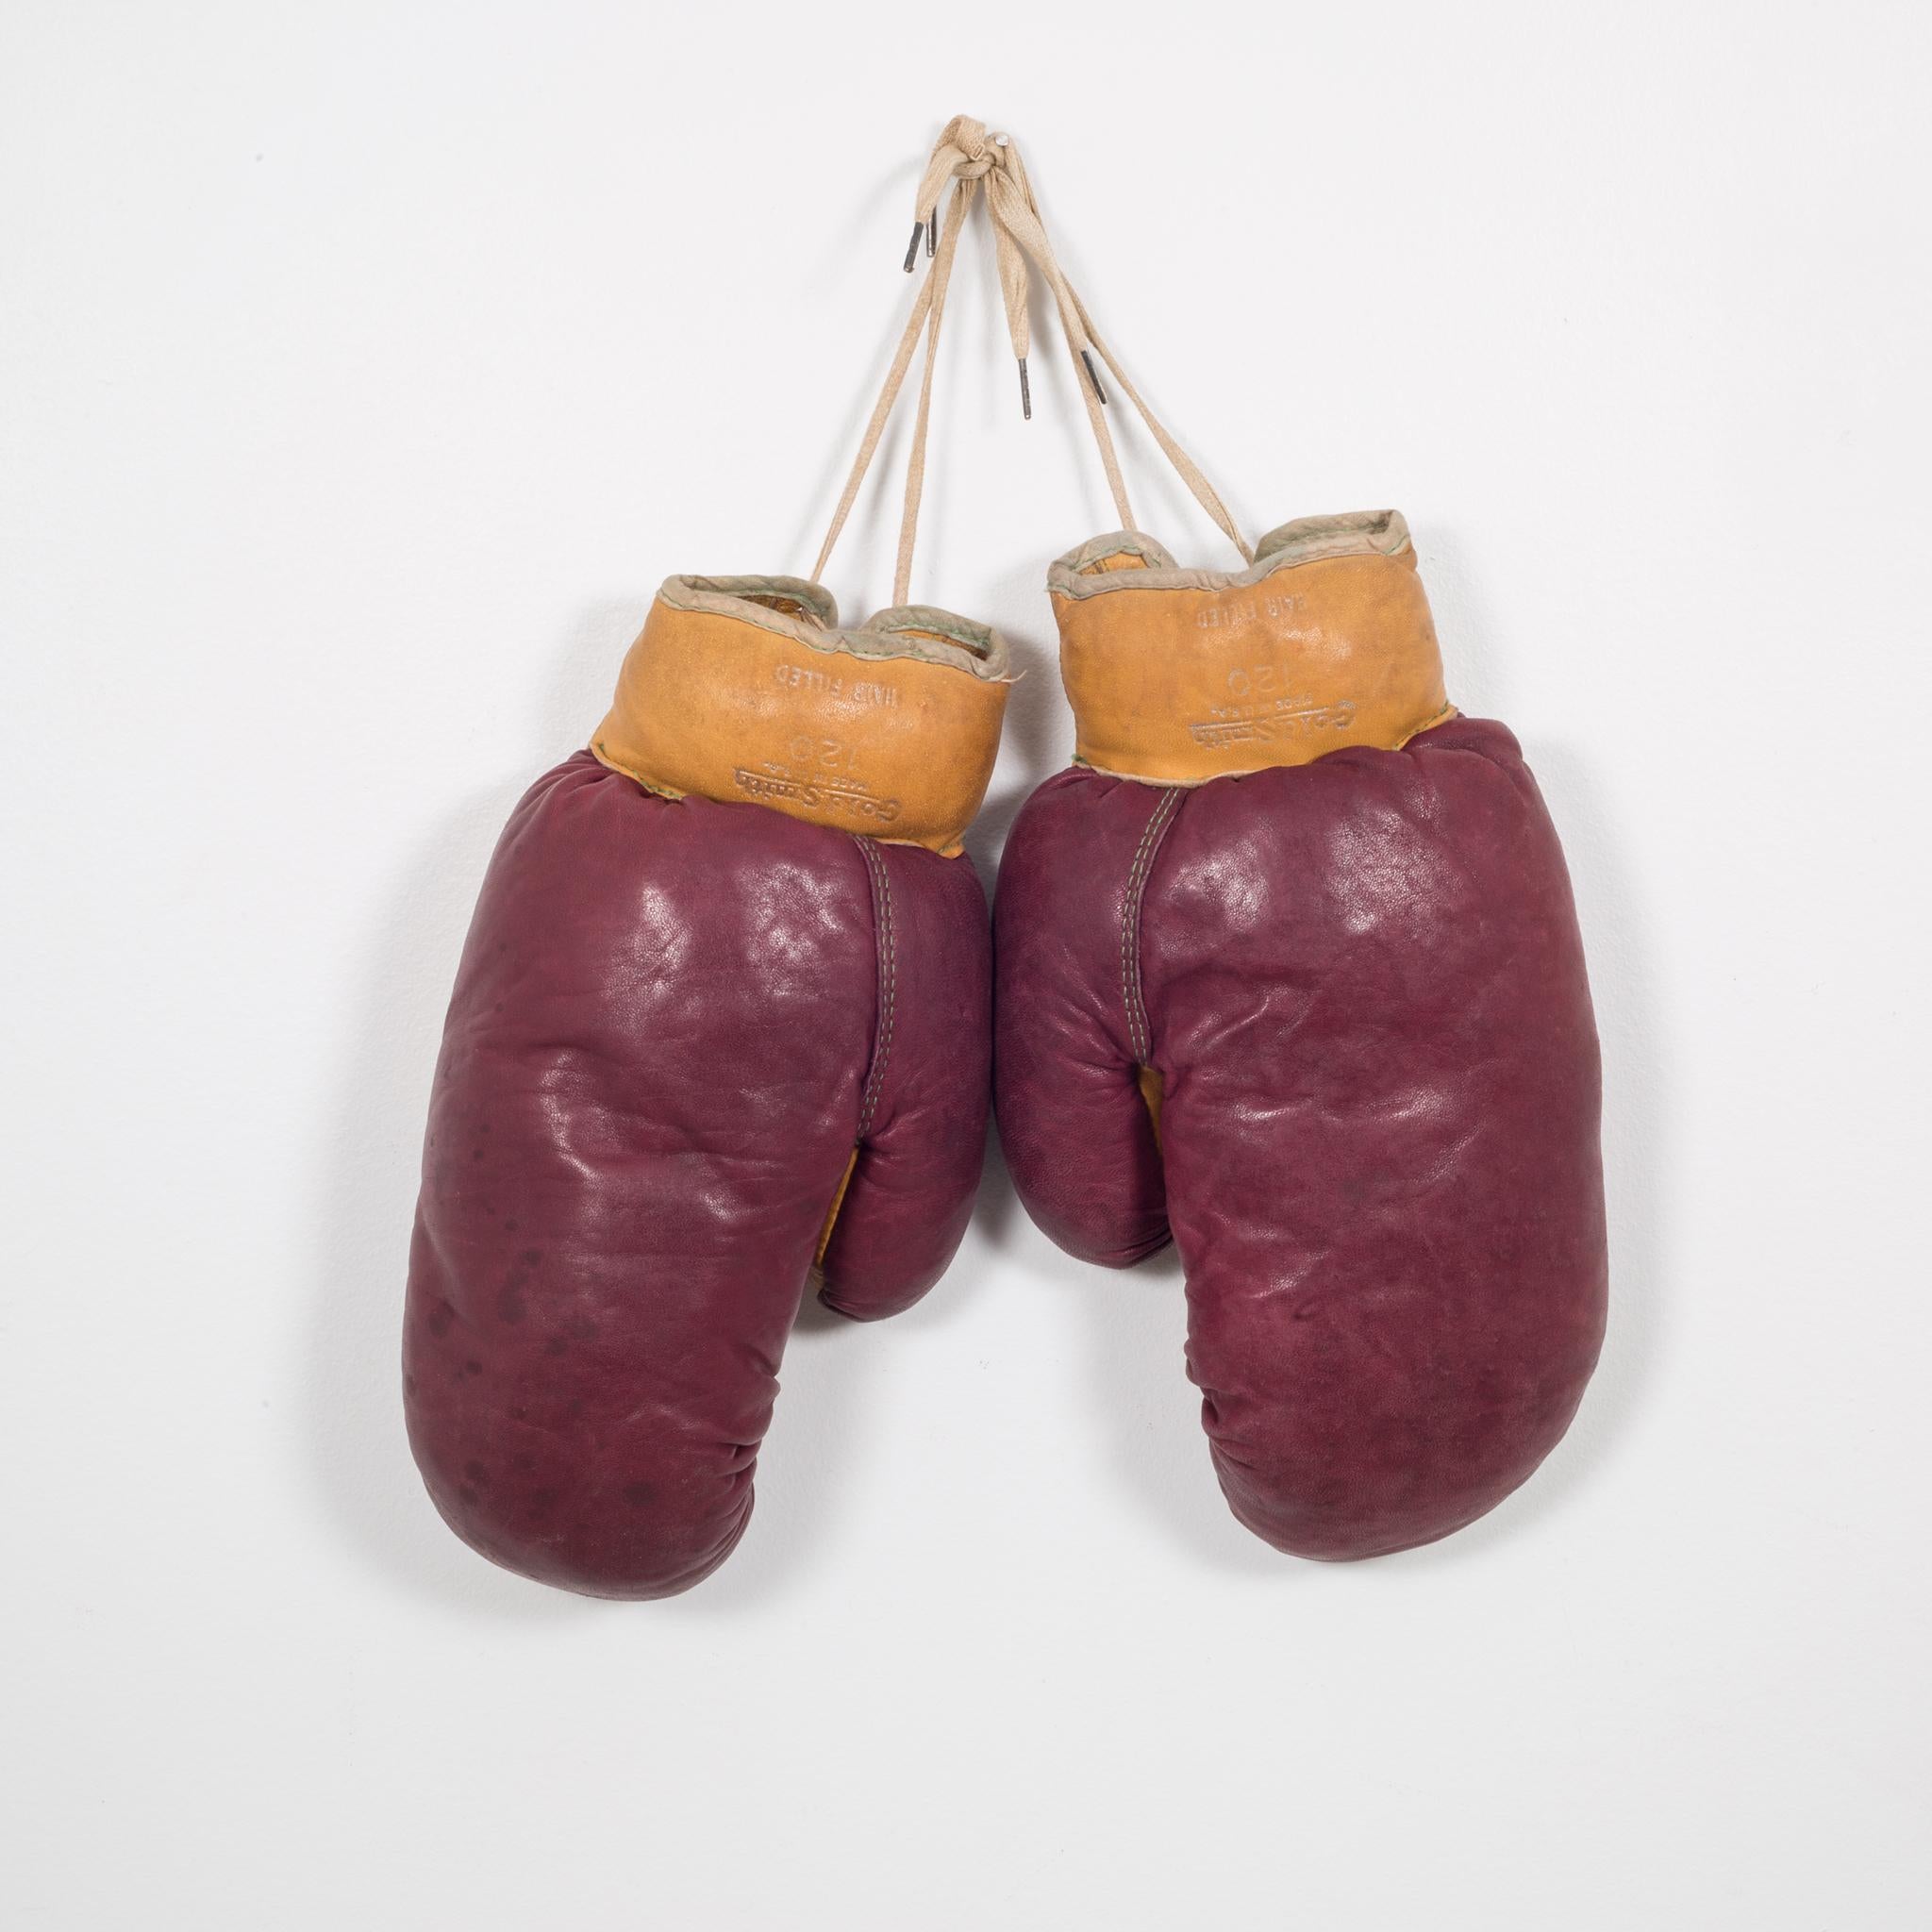 About

These are authentic vintage boxing gloves with reddish, brown leather and tobacco colored leather filled with horse hair. Each glove has green leather piping and tan laces. The leather is very soft and in good condition. Stamped 